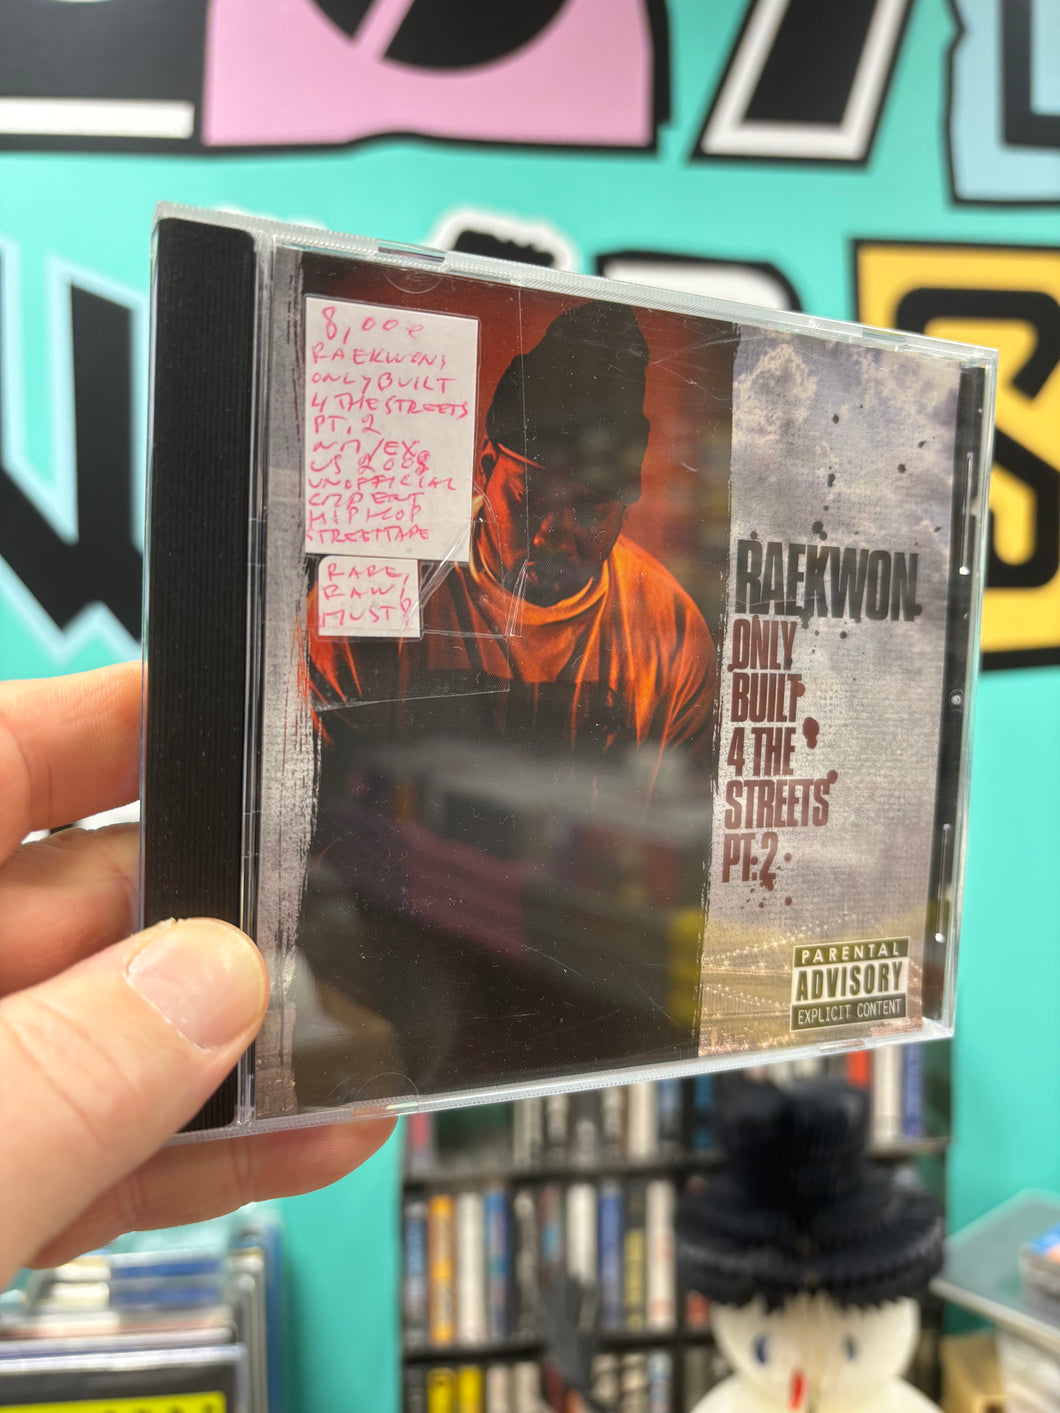 Raekwon: Only Built 4 The Streets Pt. 2, CD, US 2008